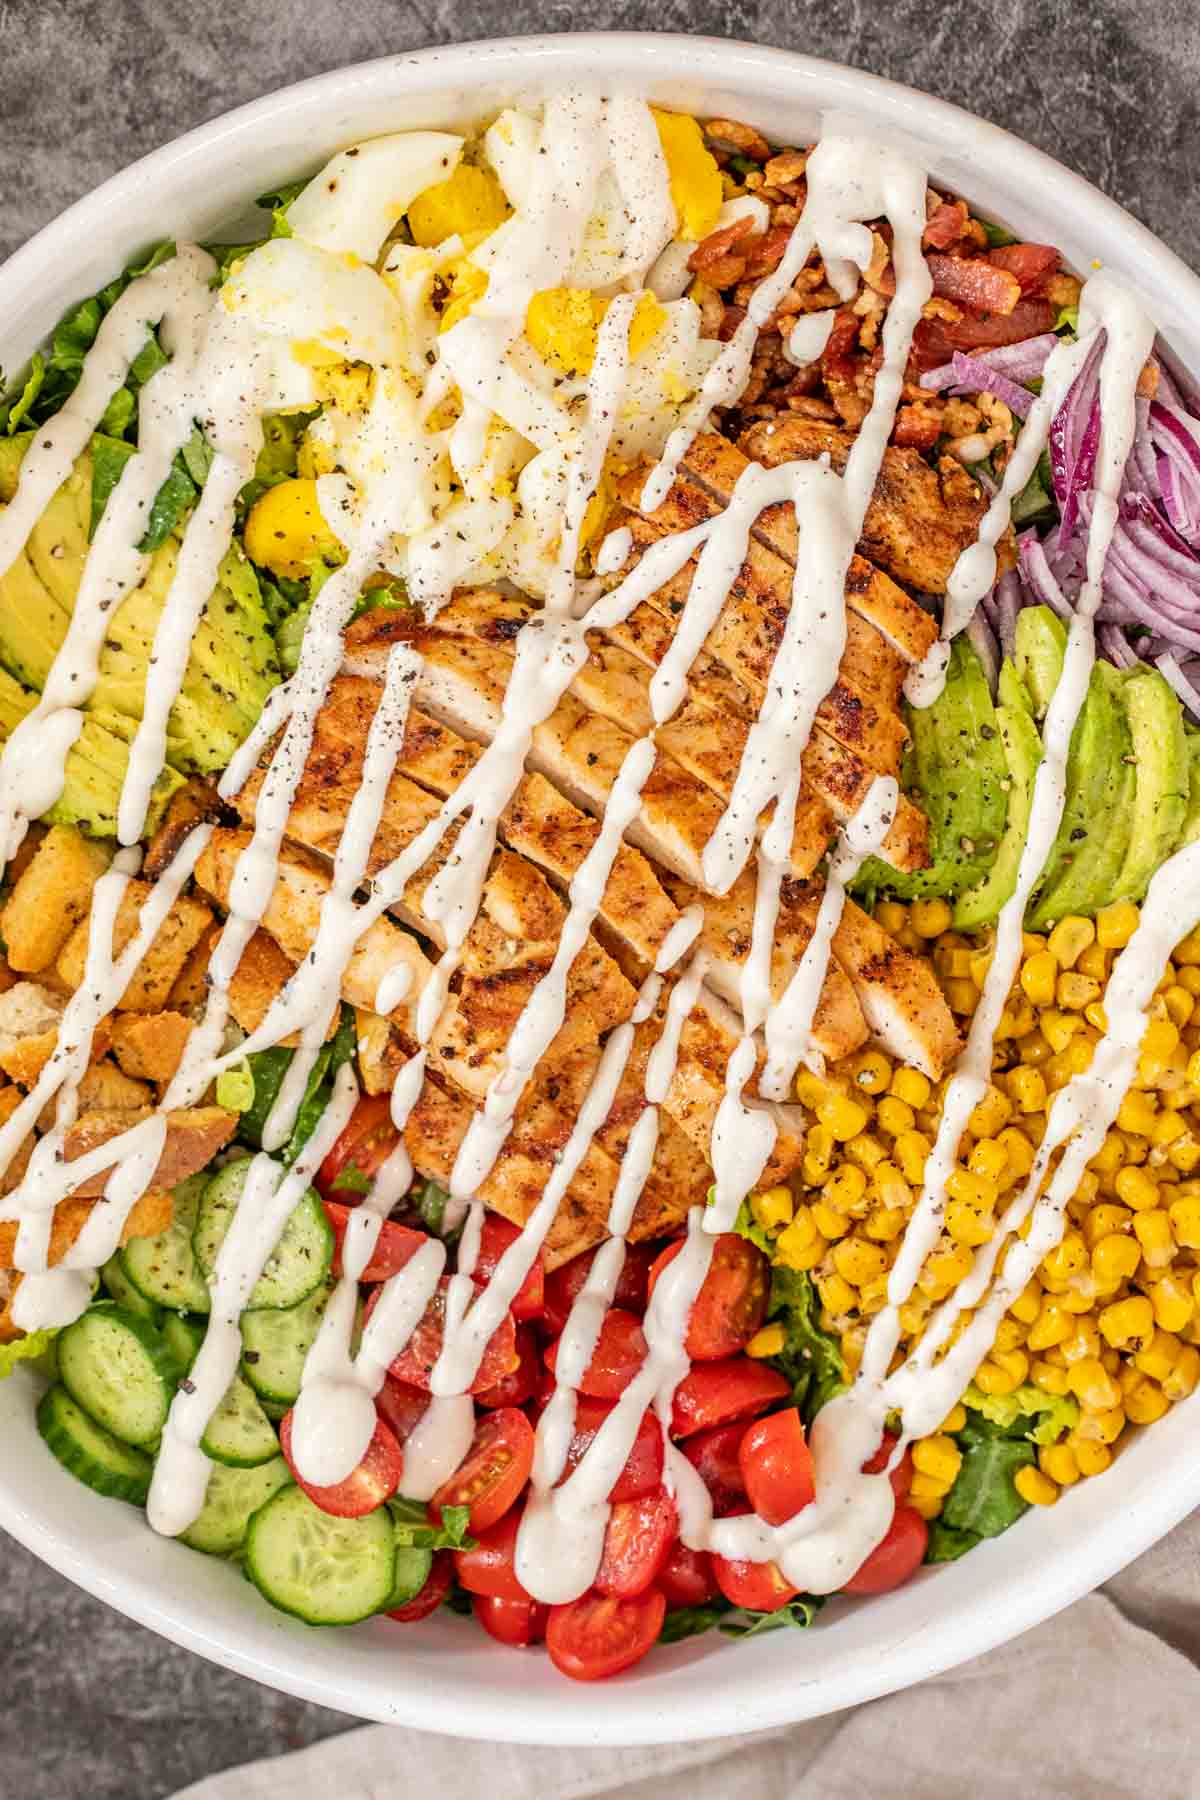 A salad bowl with the grilled chicken along with all the salad ingredients. The top is drizzled with ranch dressing.